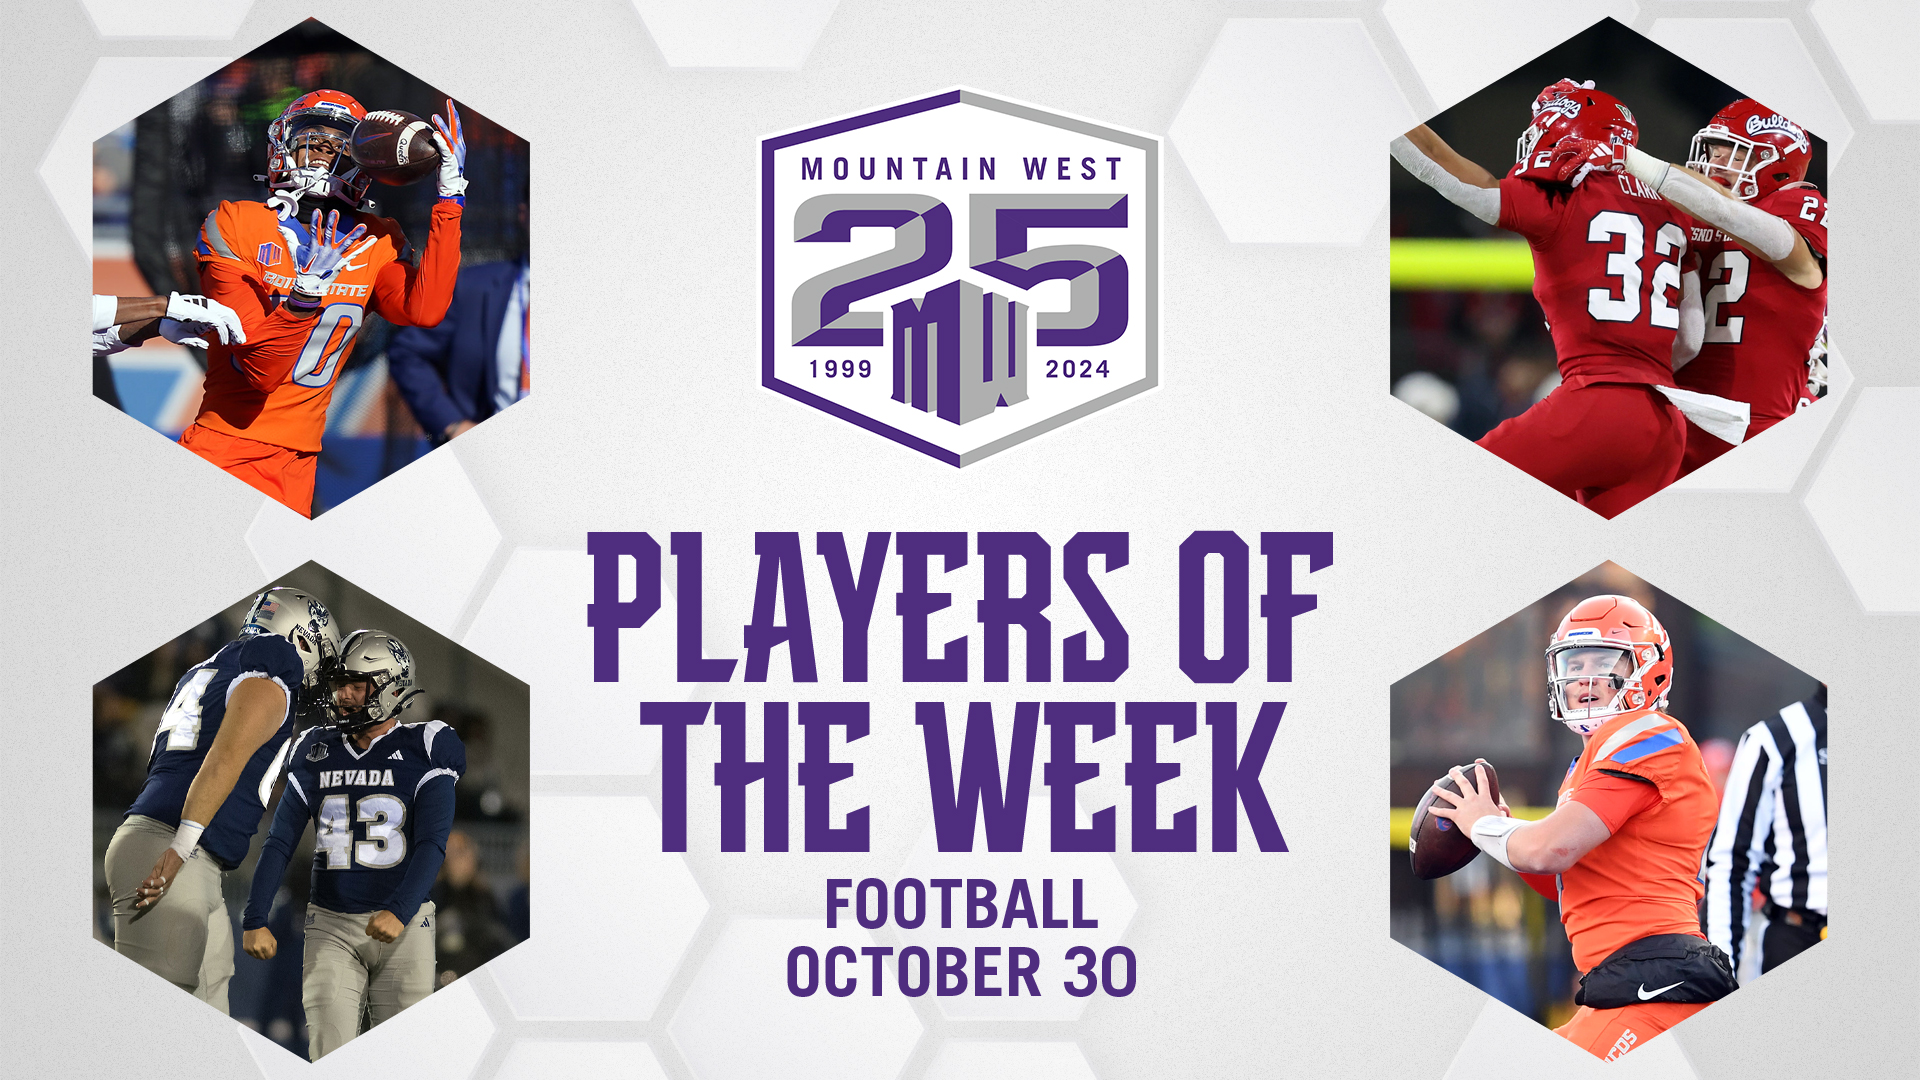 MW Football Players of the Week - Oct. 30